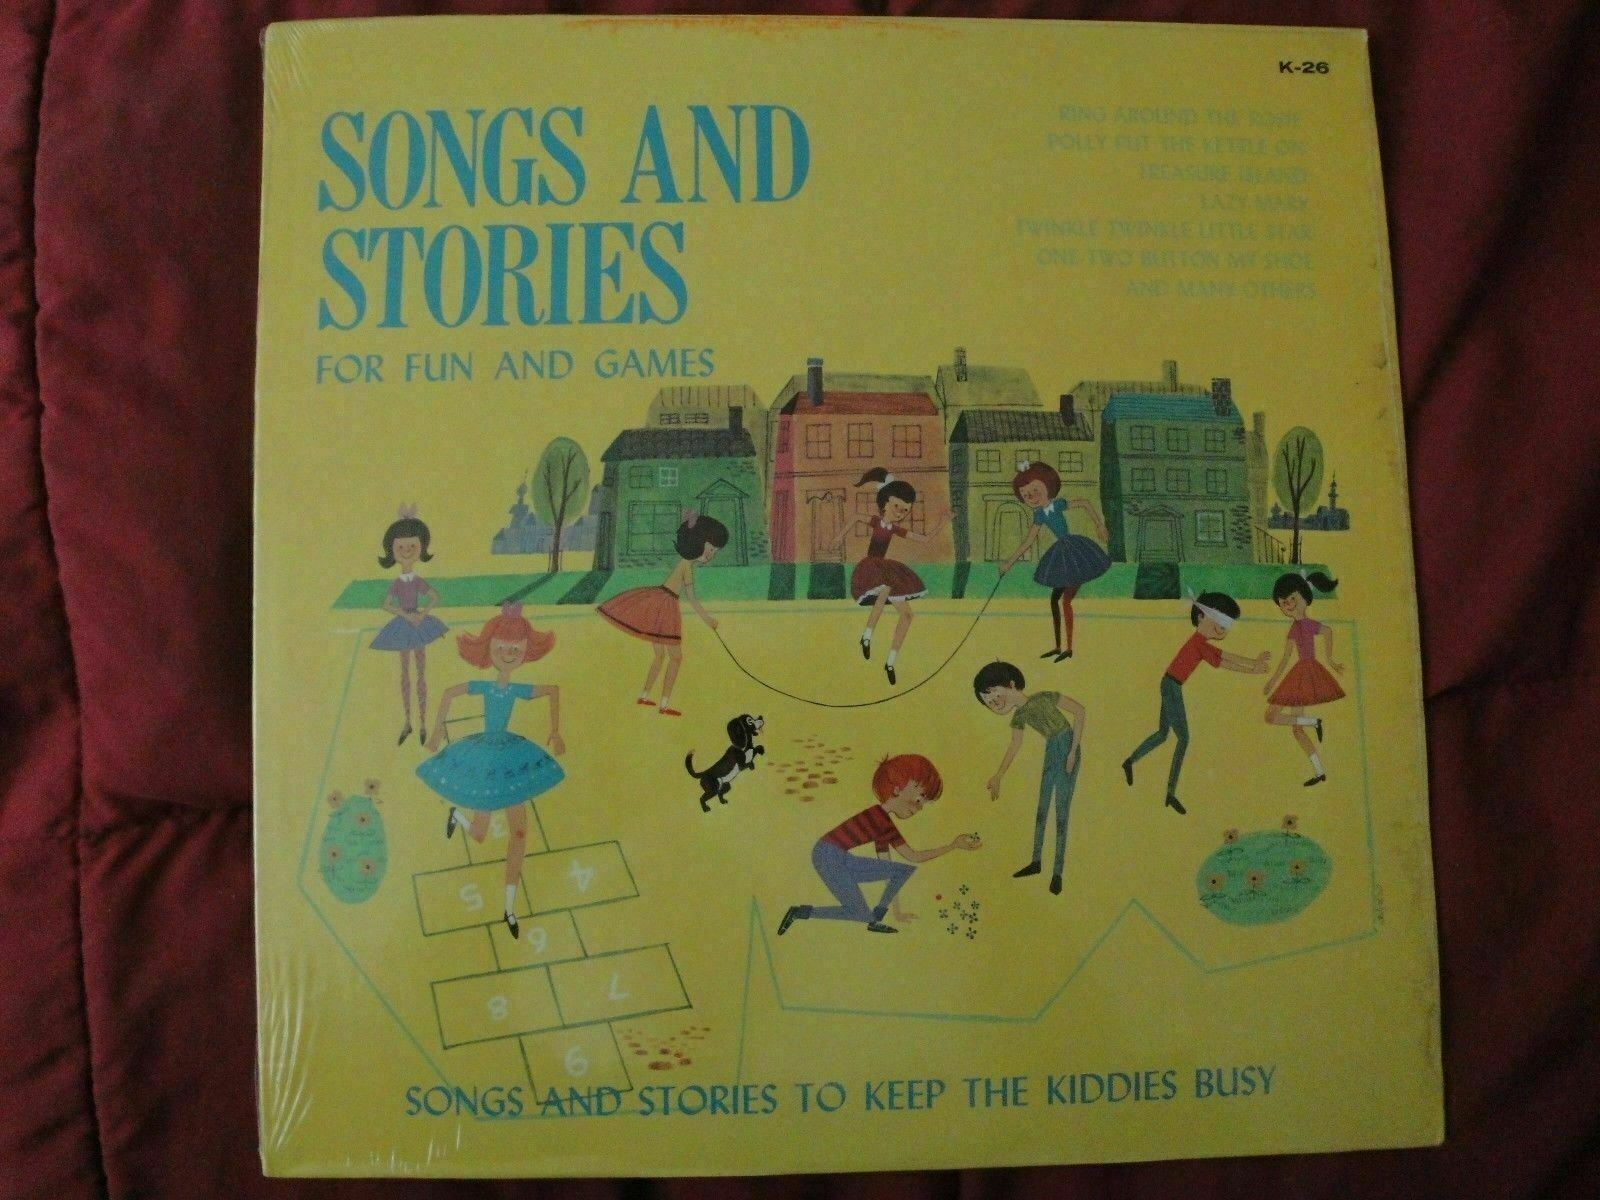 Songs and Stories for Fun and Games to Keep the Kiddies Busy NEW MINT SEALED LP